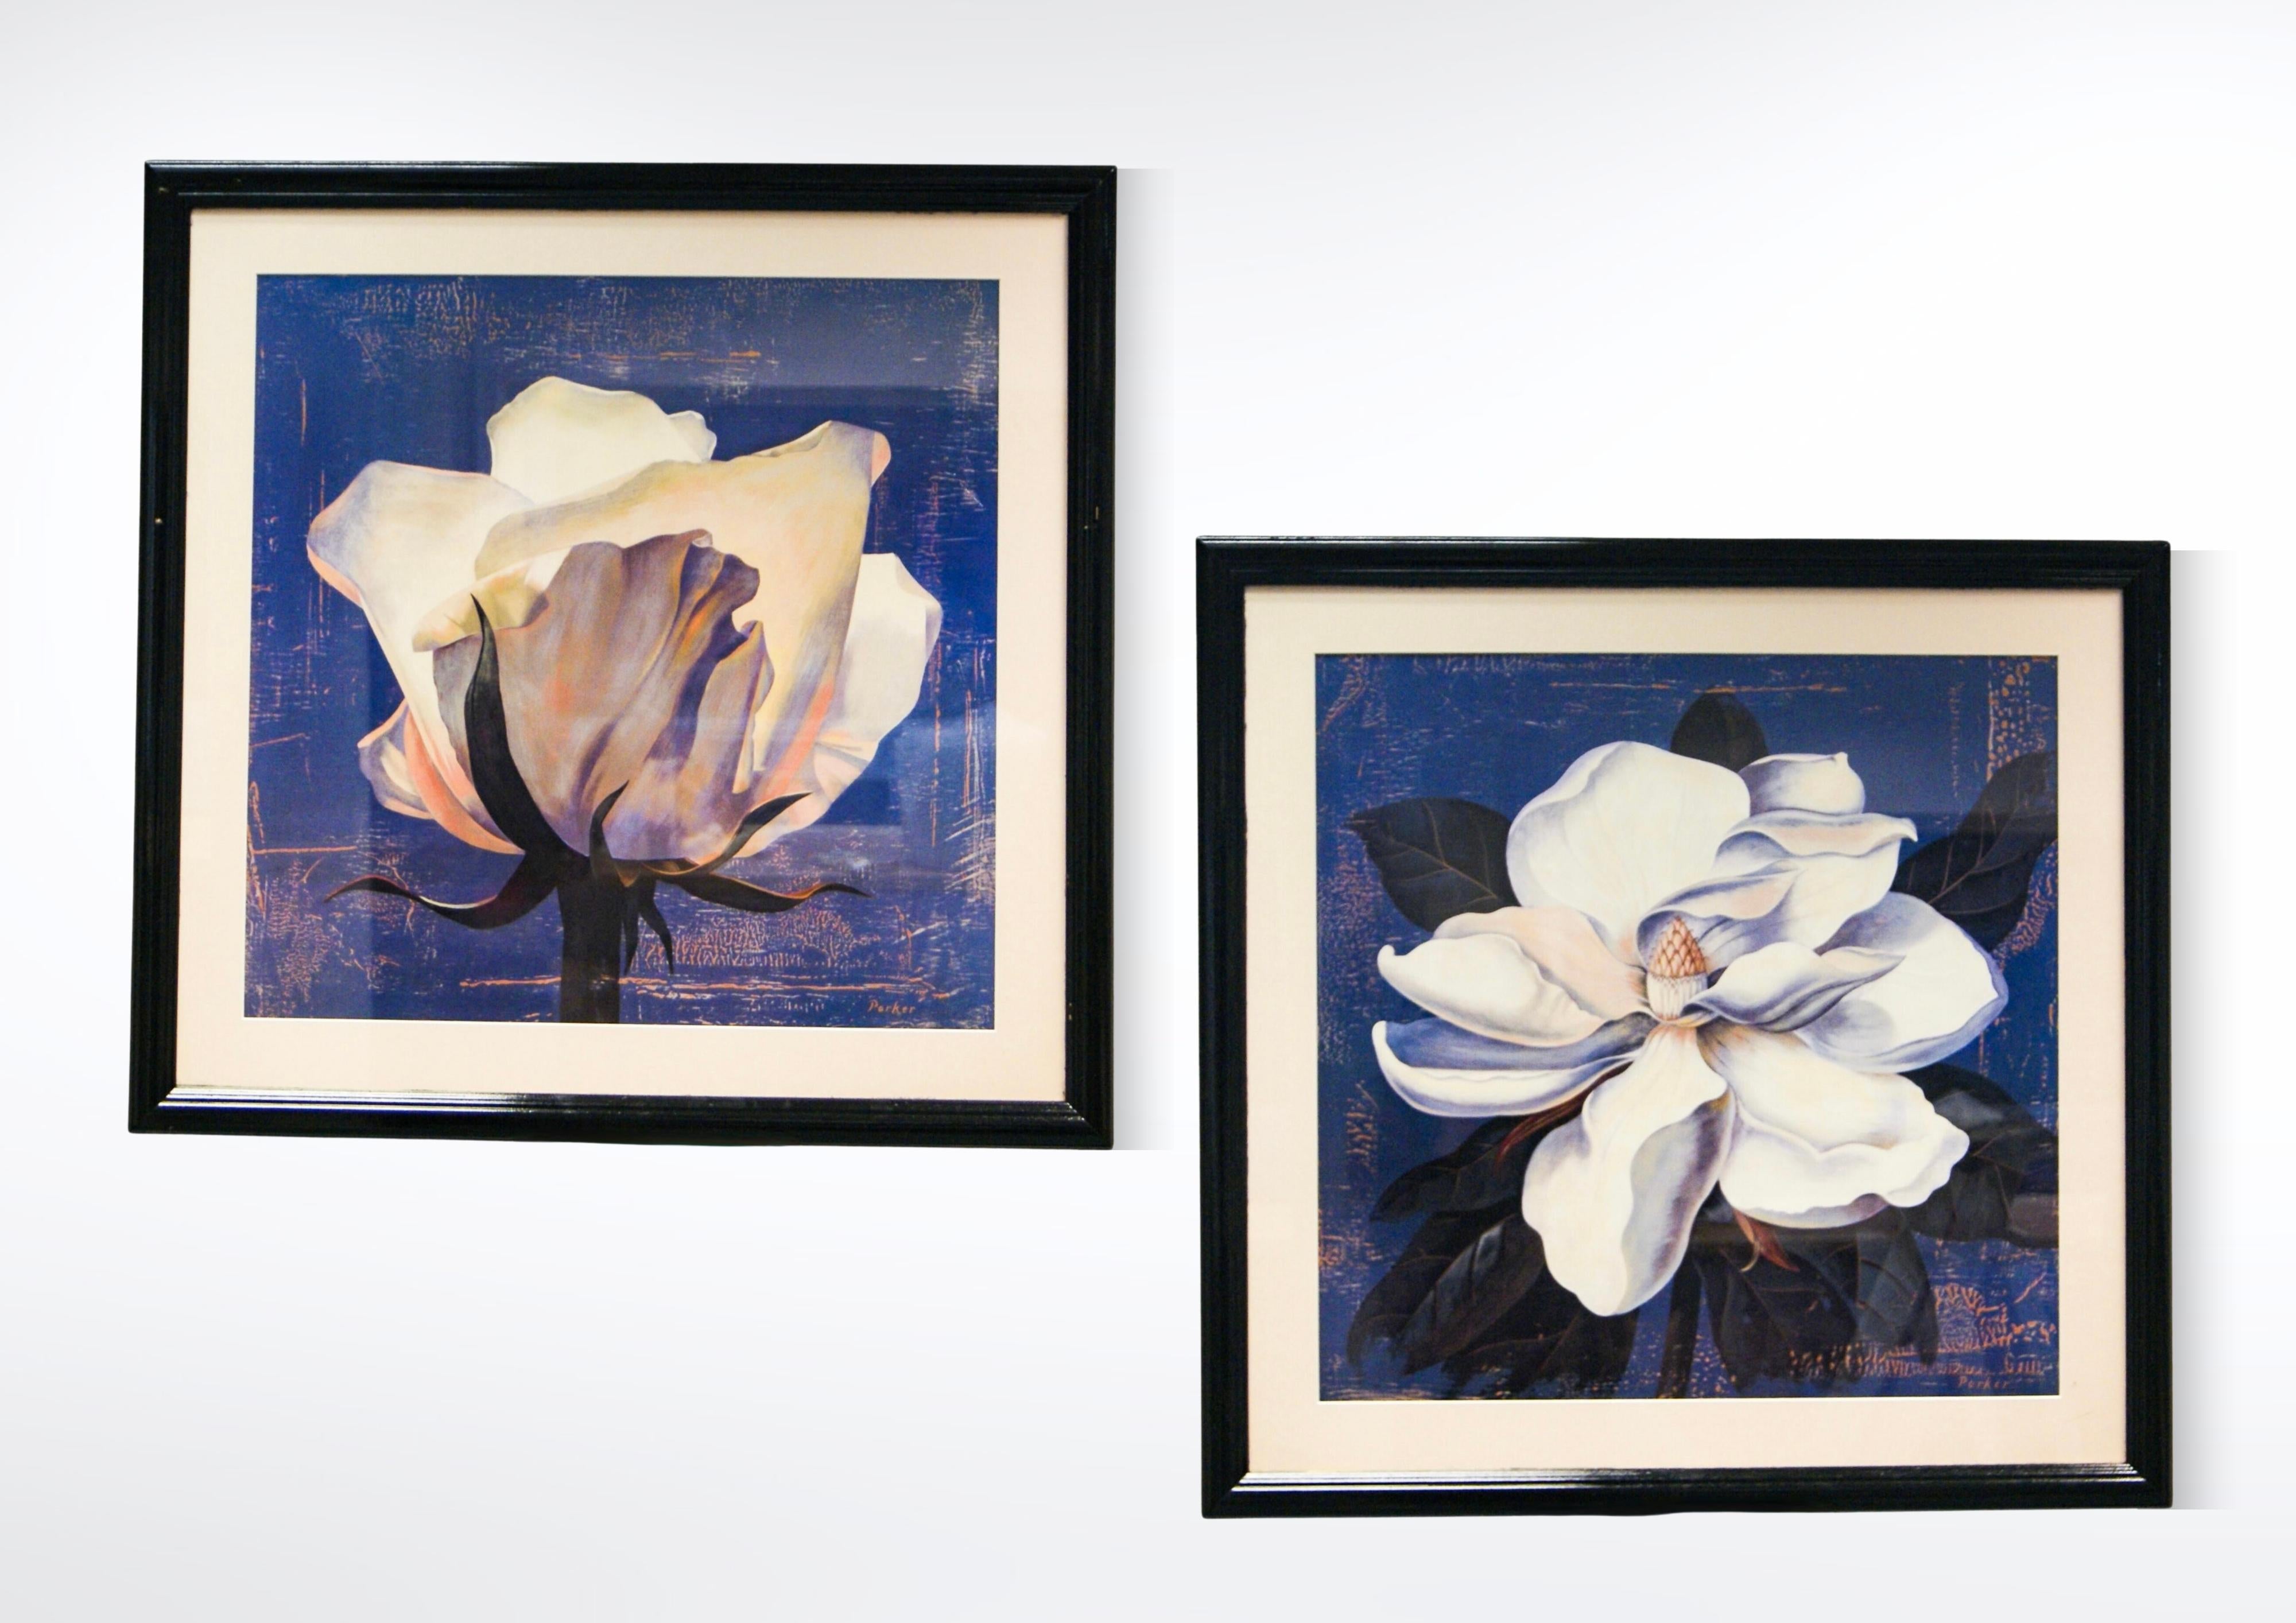 Curtis Parker Glowing Magnolia and Glowing White Rose, Set of 2 large sized framed art prints. Circa 1970s.
Featuring the complete 'Glowing Magnolia' & 'Glowing White Rose' matching set.The vibrant yet subtle colouring of these framed floral art